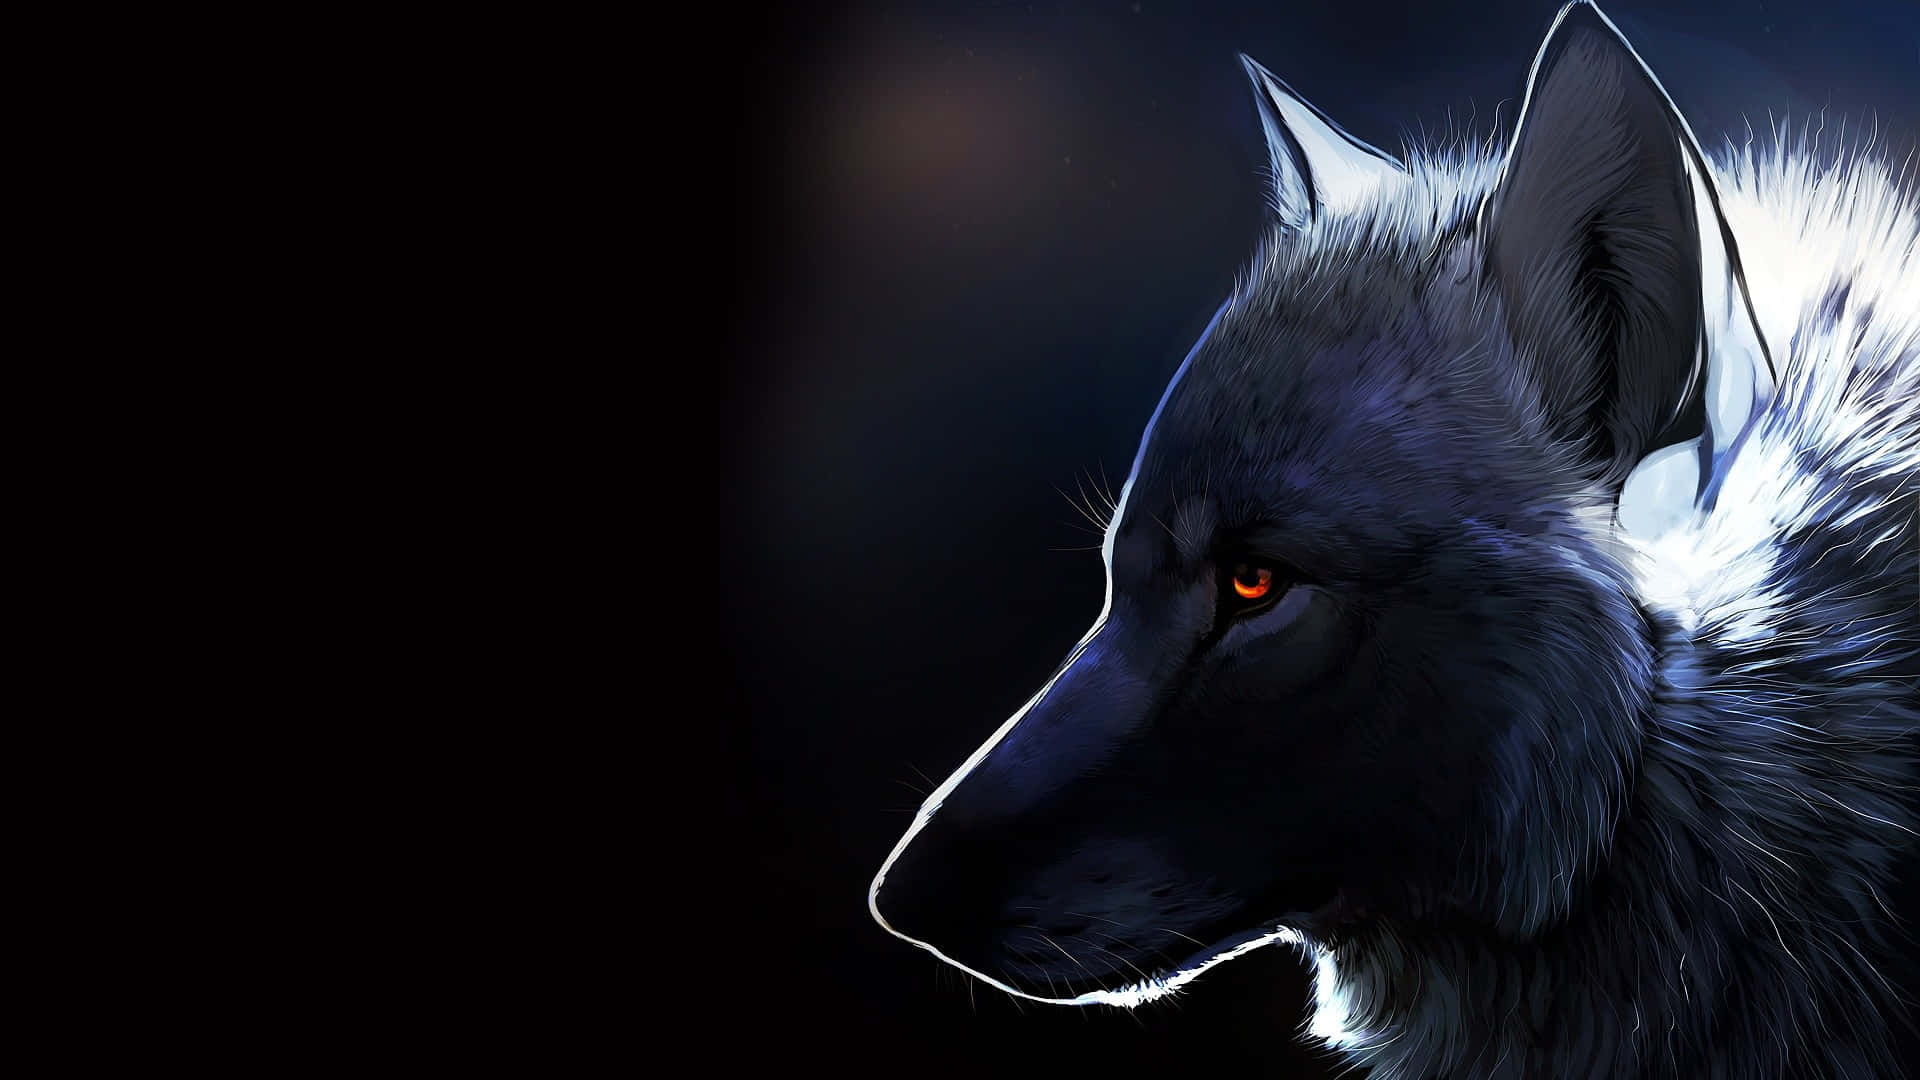 "Tread carefully as you enter the realm of the cool anime wolf" Wallpaper